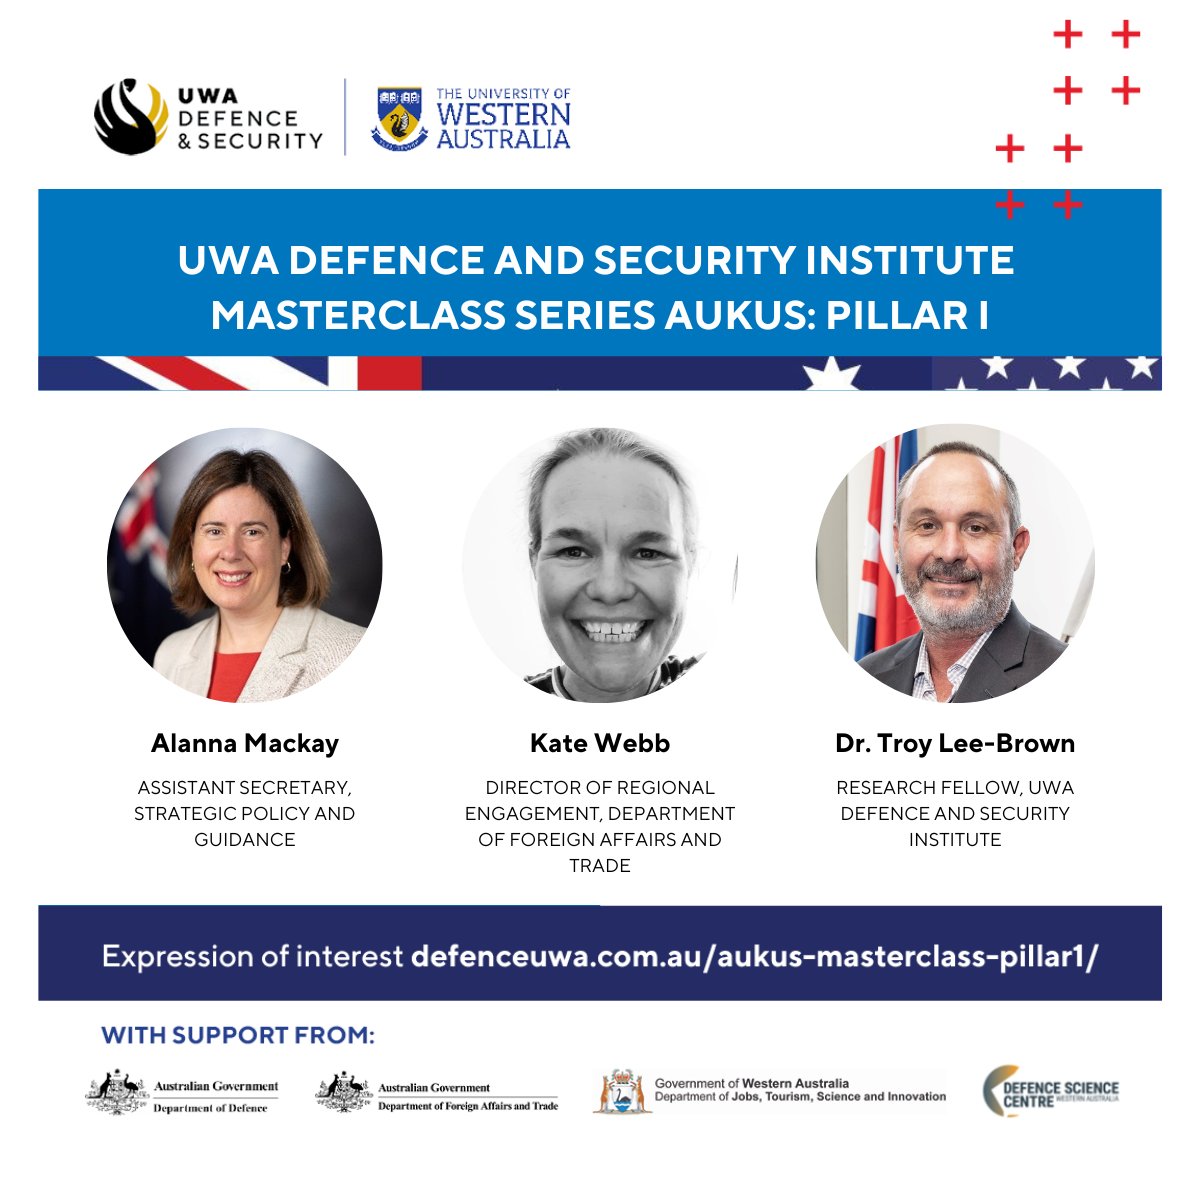 It's just two days to the Masterclass Series AUKUS: Pillar I, and we're excited to announce panel of experts Alanna Mackay, Kate Webb and Dr Troy Lee-Brown, who will discuss all things geopolitics, strategy and the regional defence framework. bit.ly/aukus #UWADSI_AUKUS